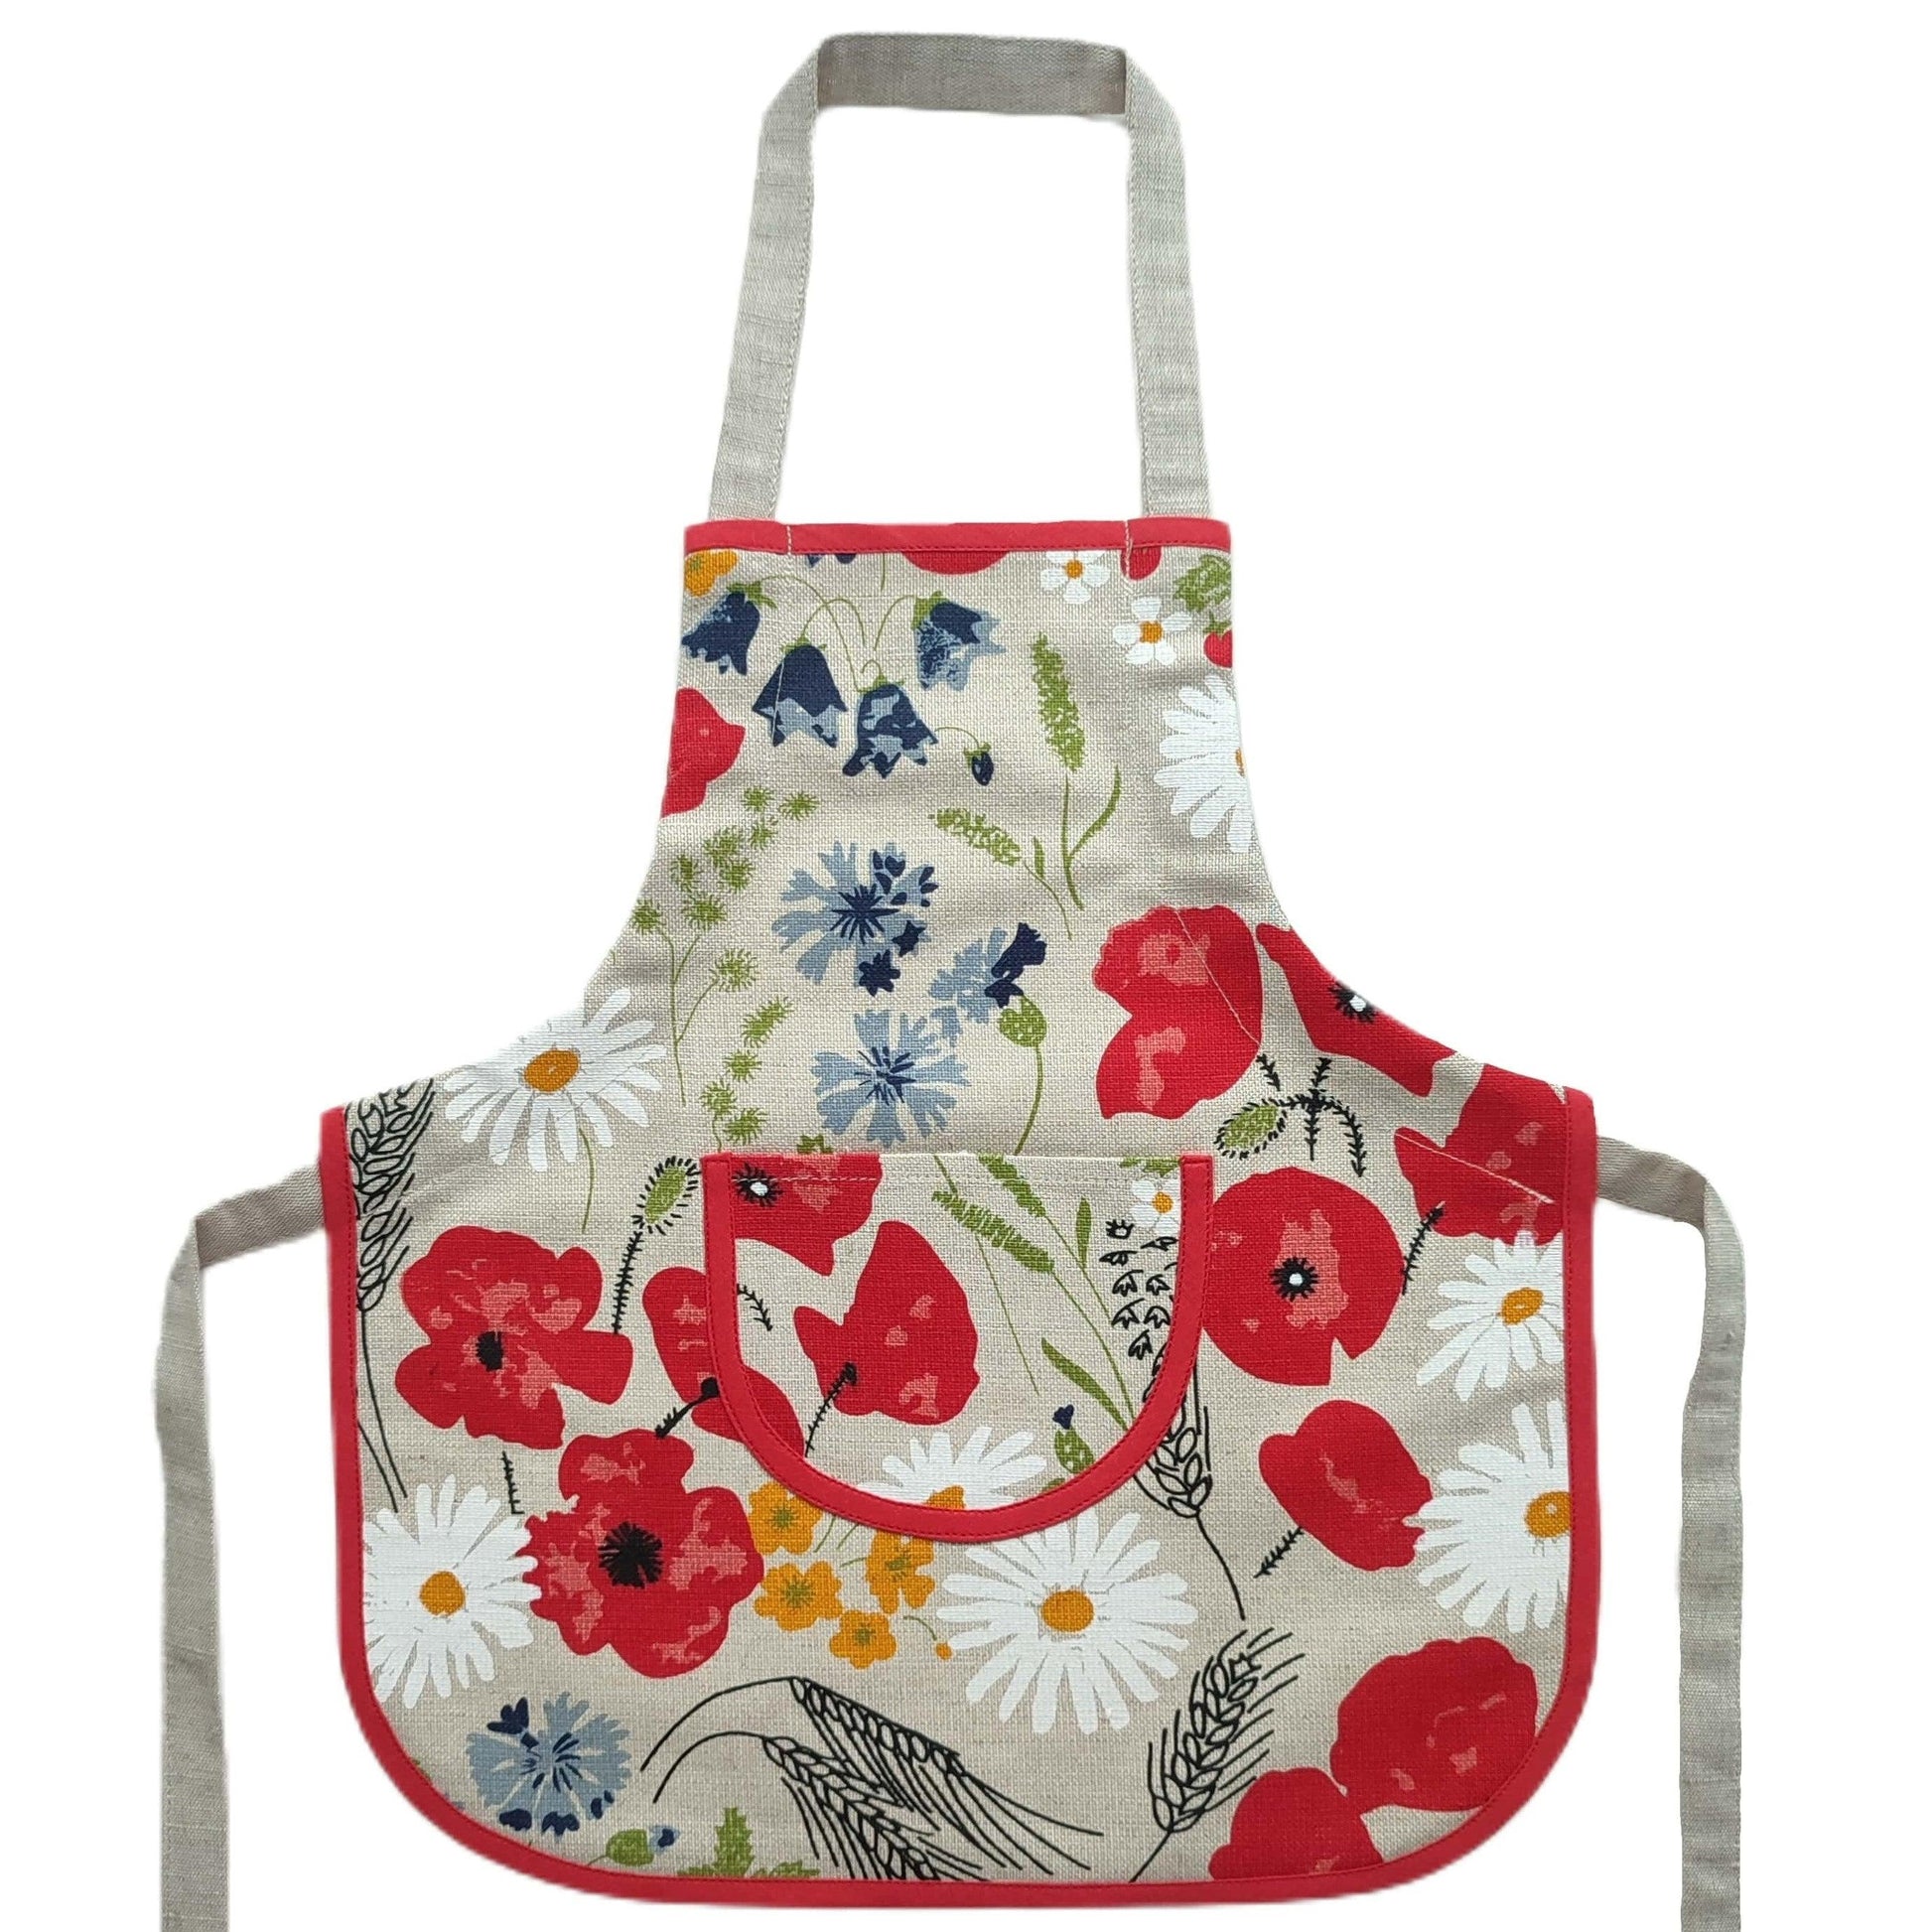 Children's apron (1-4 years old) FLOWERS - Linen4me